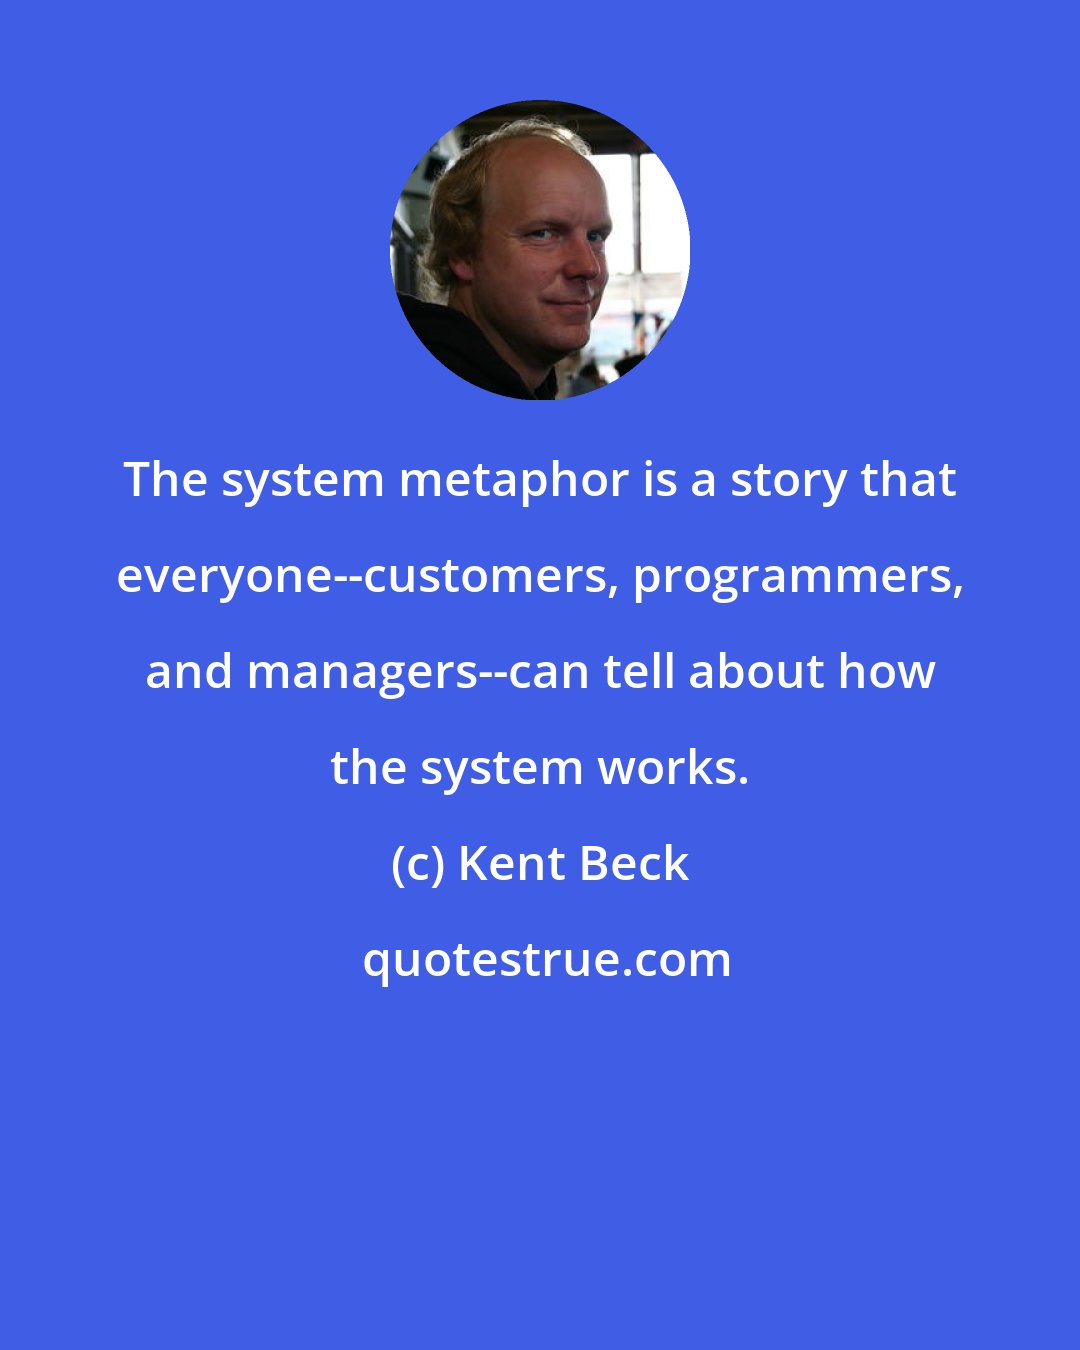 Kent Beck: The system metaphor is a story that everyone--customers, programmers, and managers--can tell about how the system works.